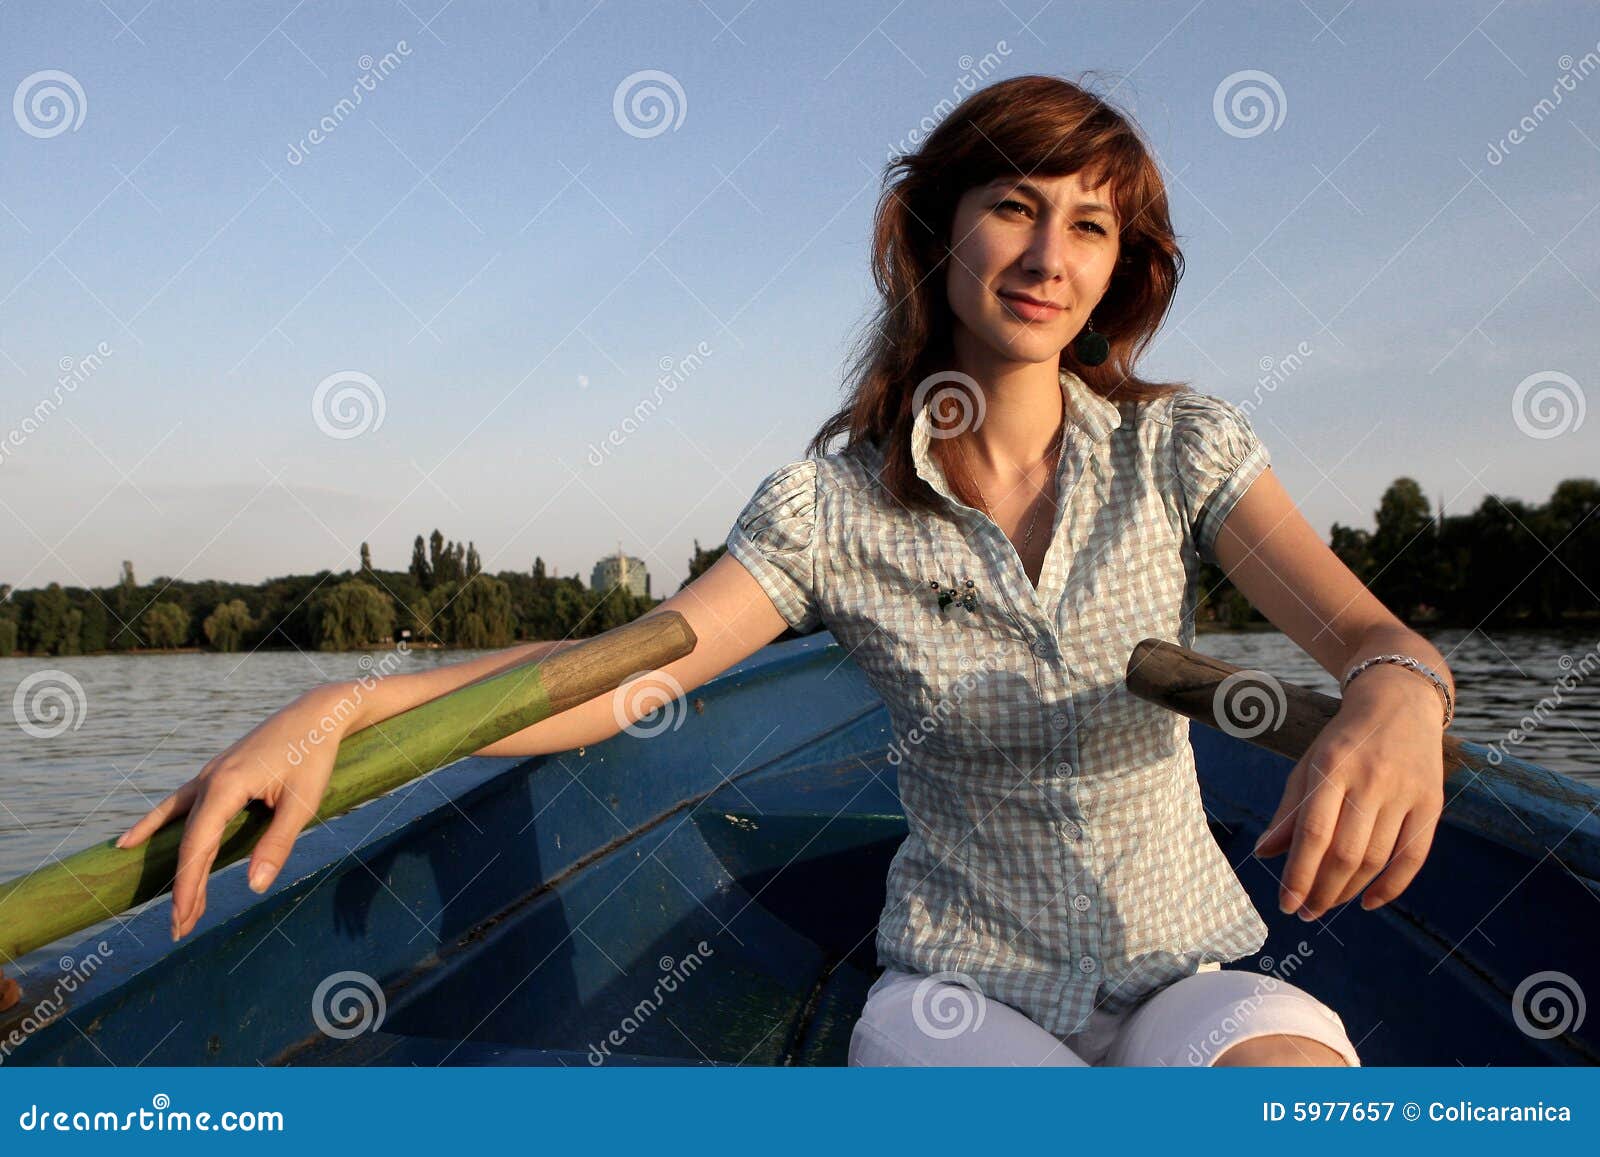 Girl Rowing A Boat Royalty Free Stock Photography - Image: 5977657